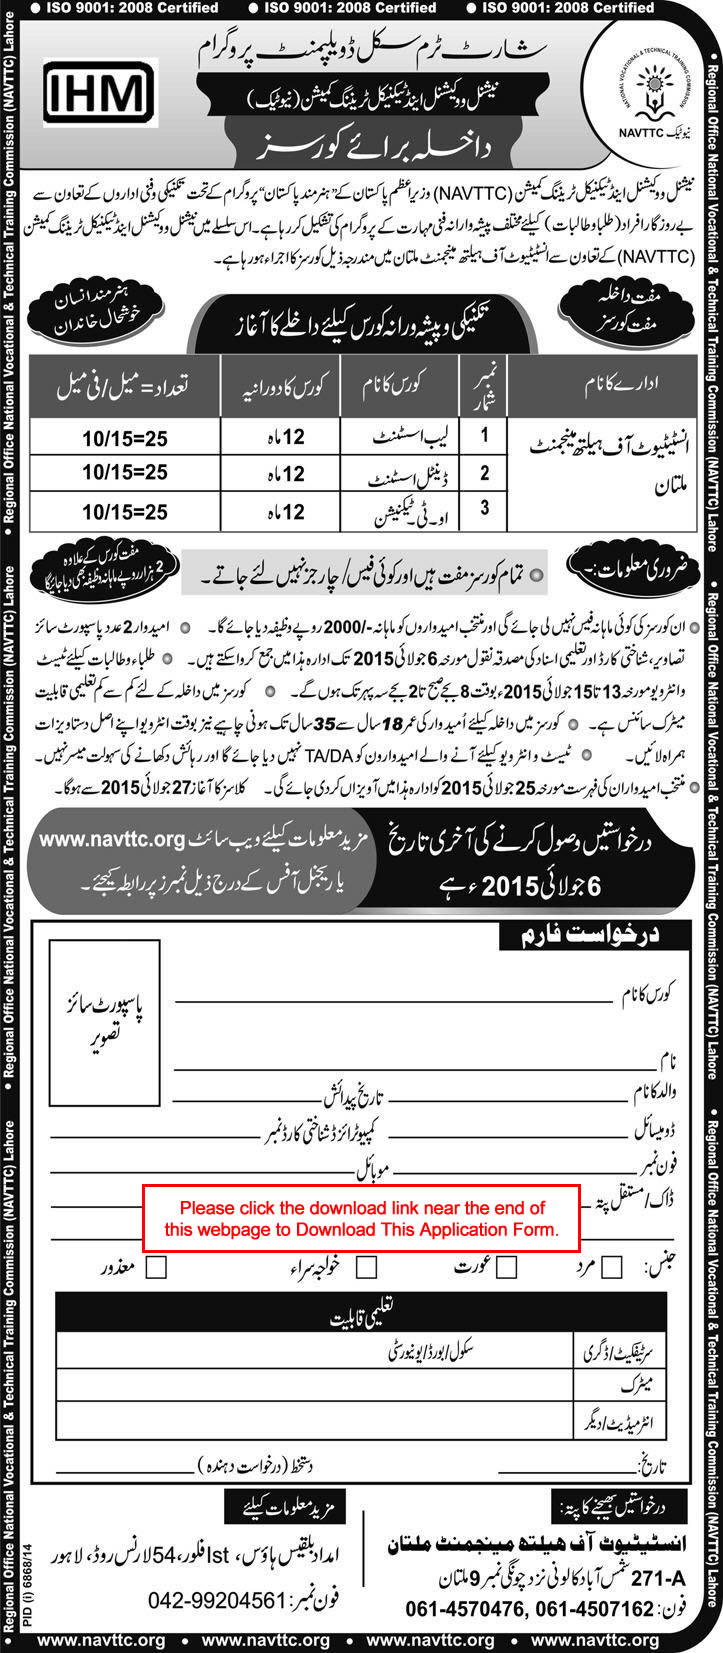 Institute of Health Management Multan Free Courses 2015 June NAVTTC Application Form Download